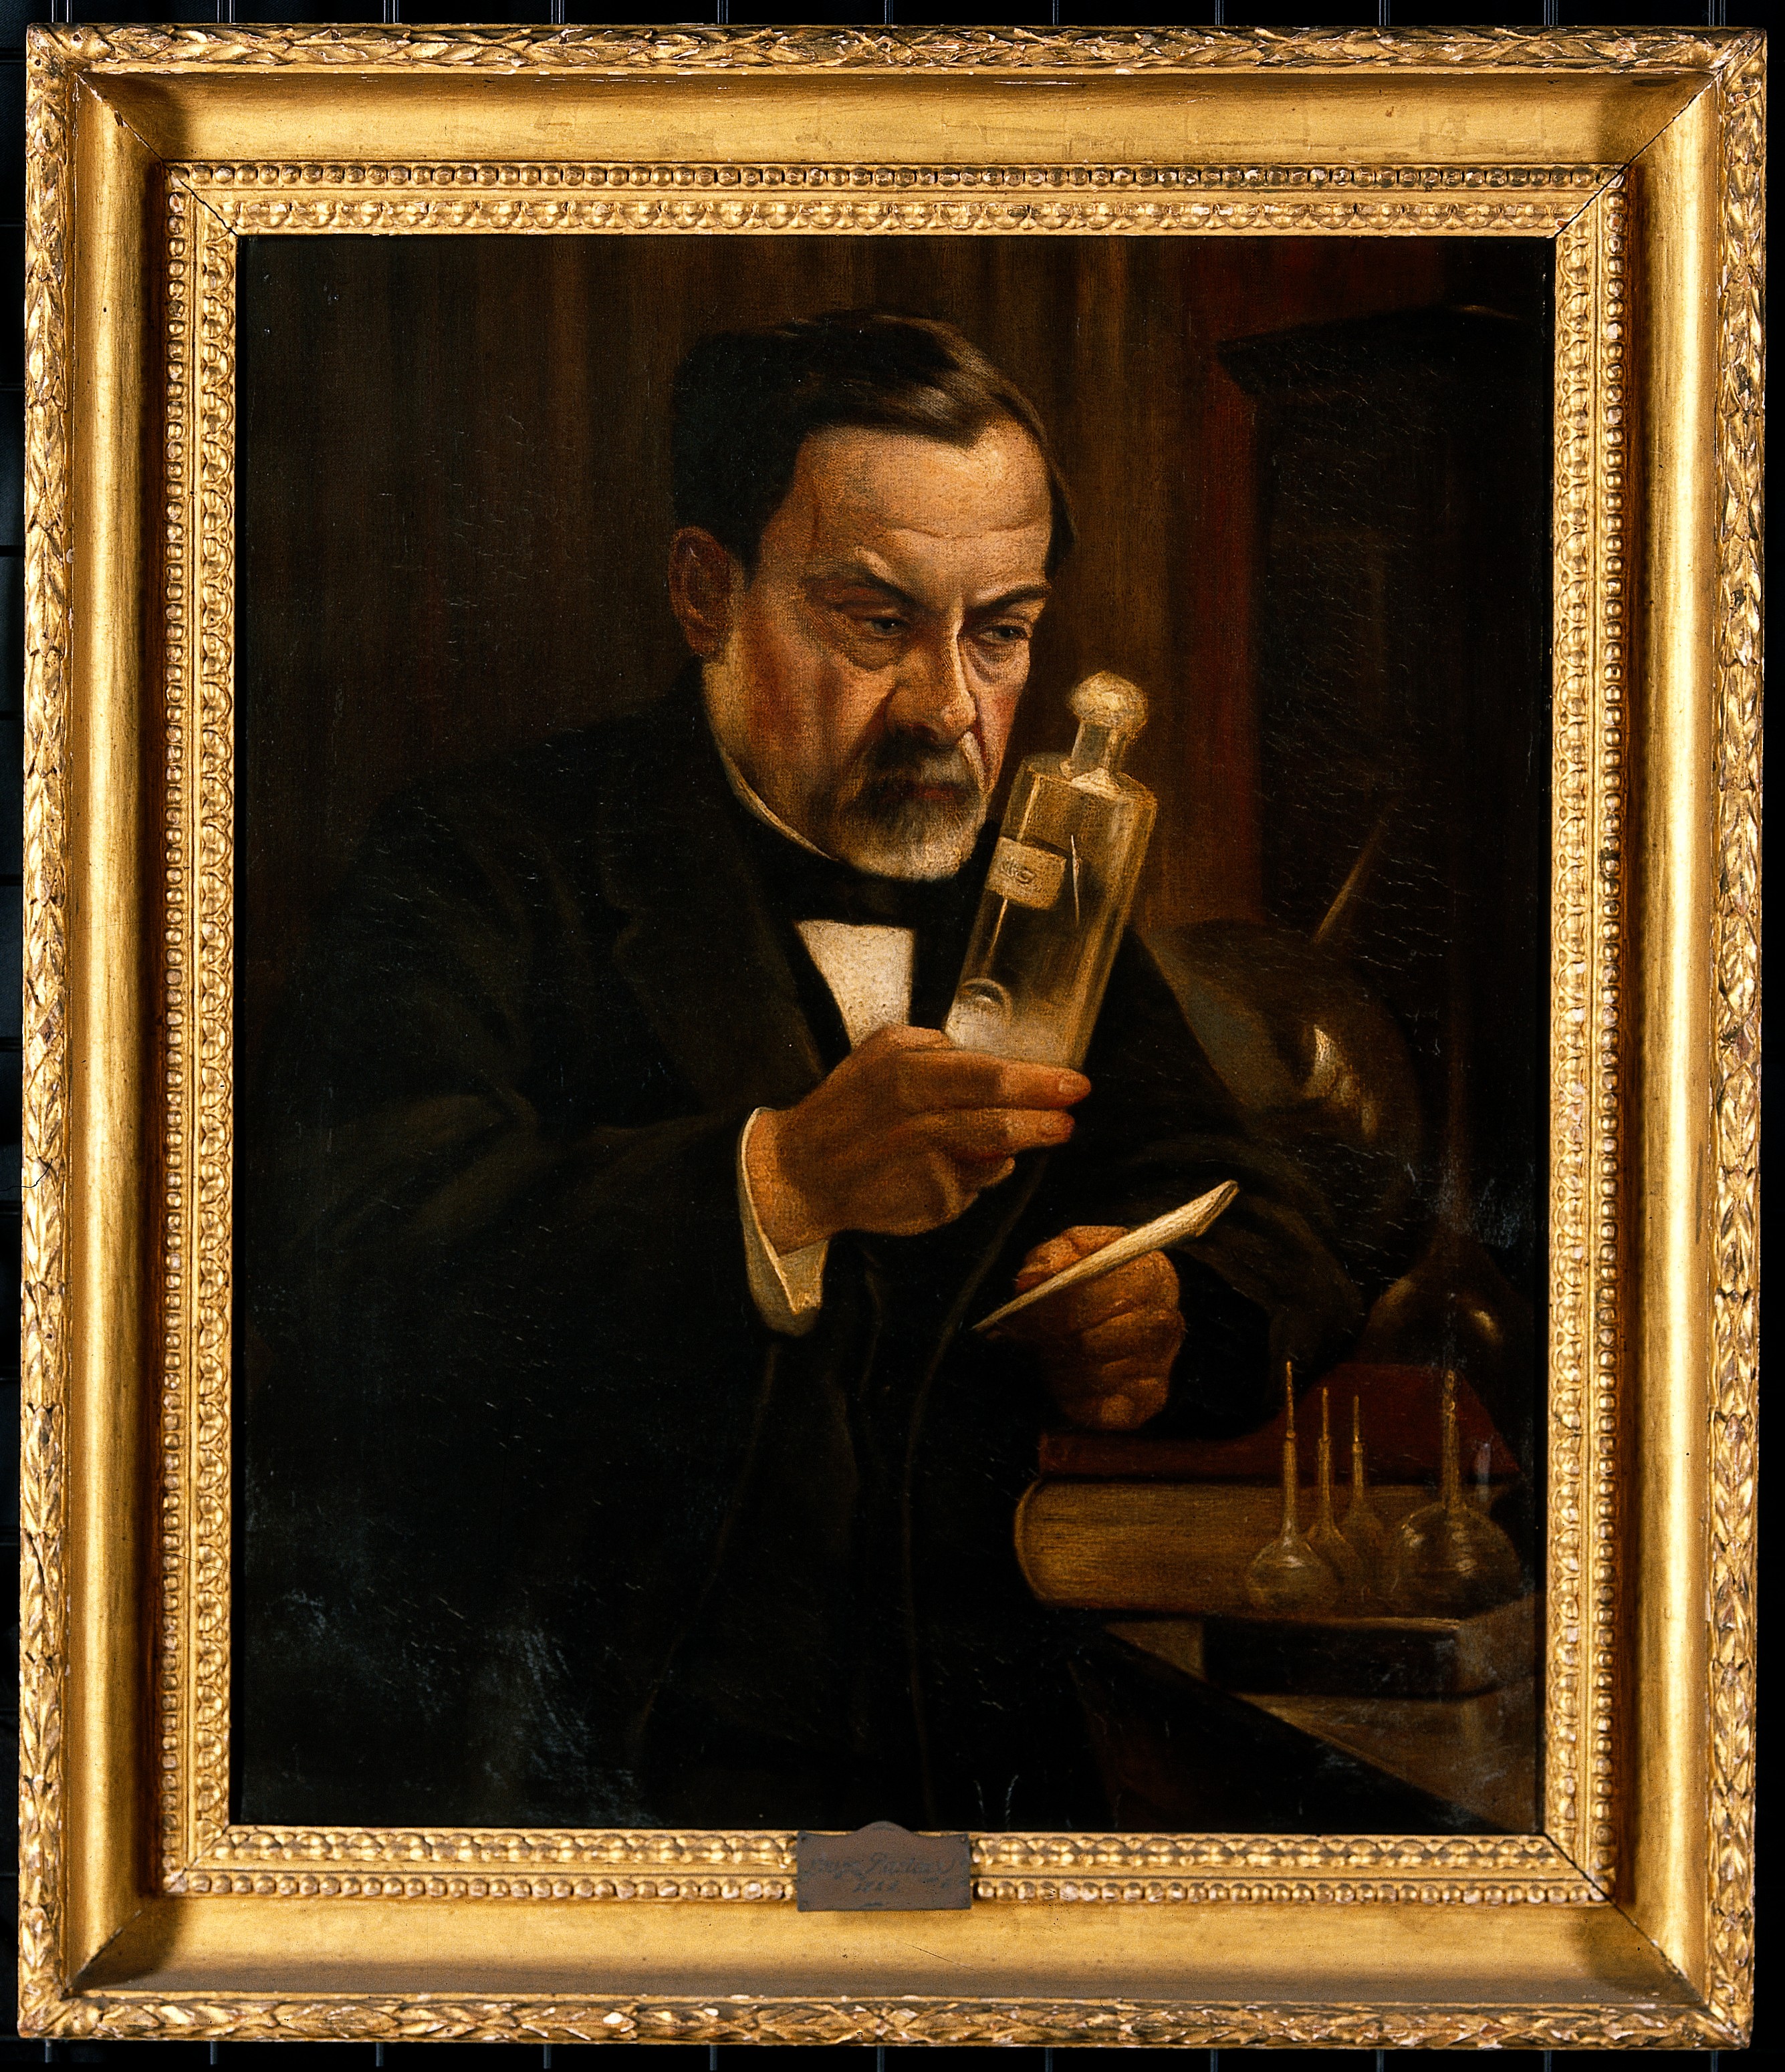 Louis Pasteur, proponent of the 'germ' theory of disease. Wellcome V0018018